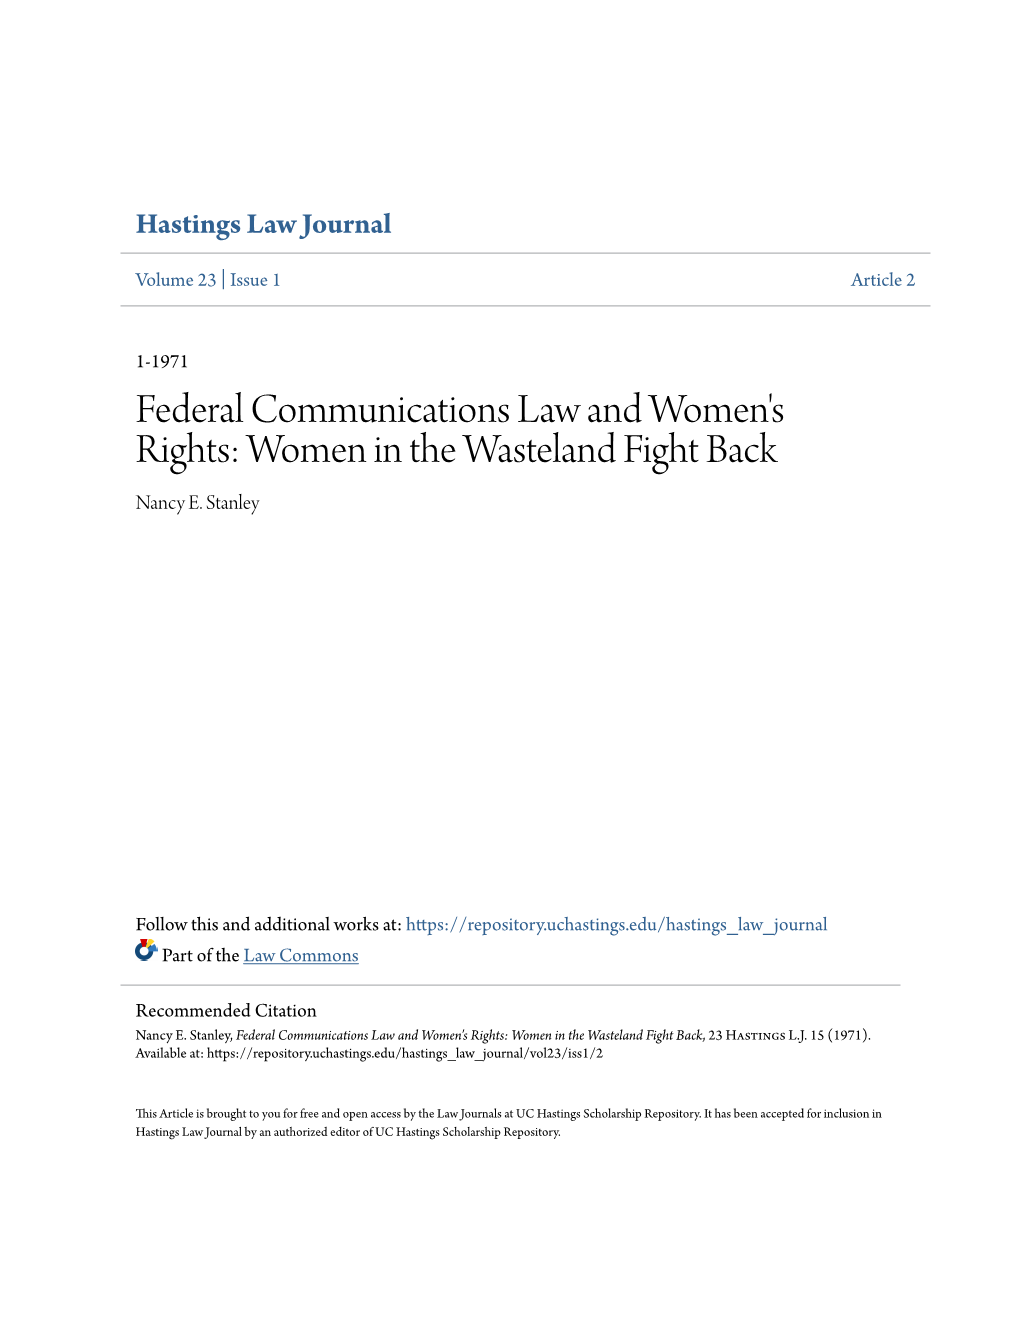 Federal Communications Law and Women's Rights: Women in the Wasteland Fight Back Nancy E